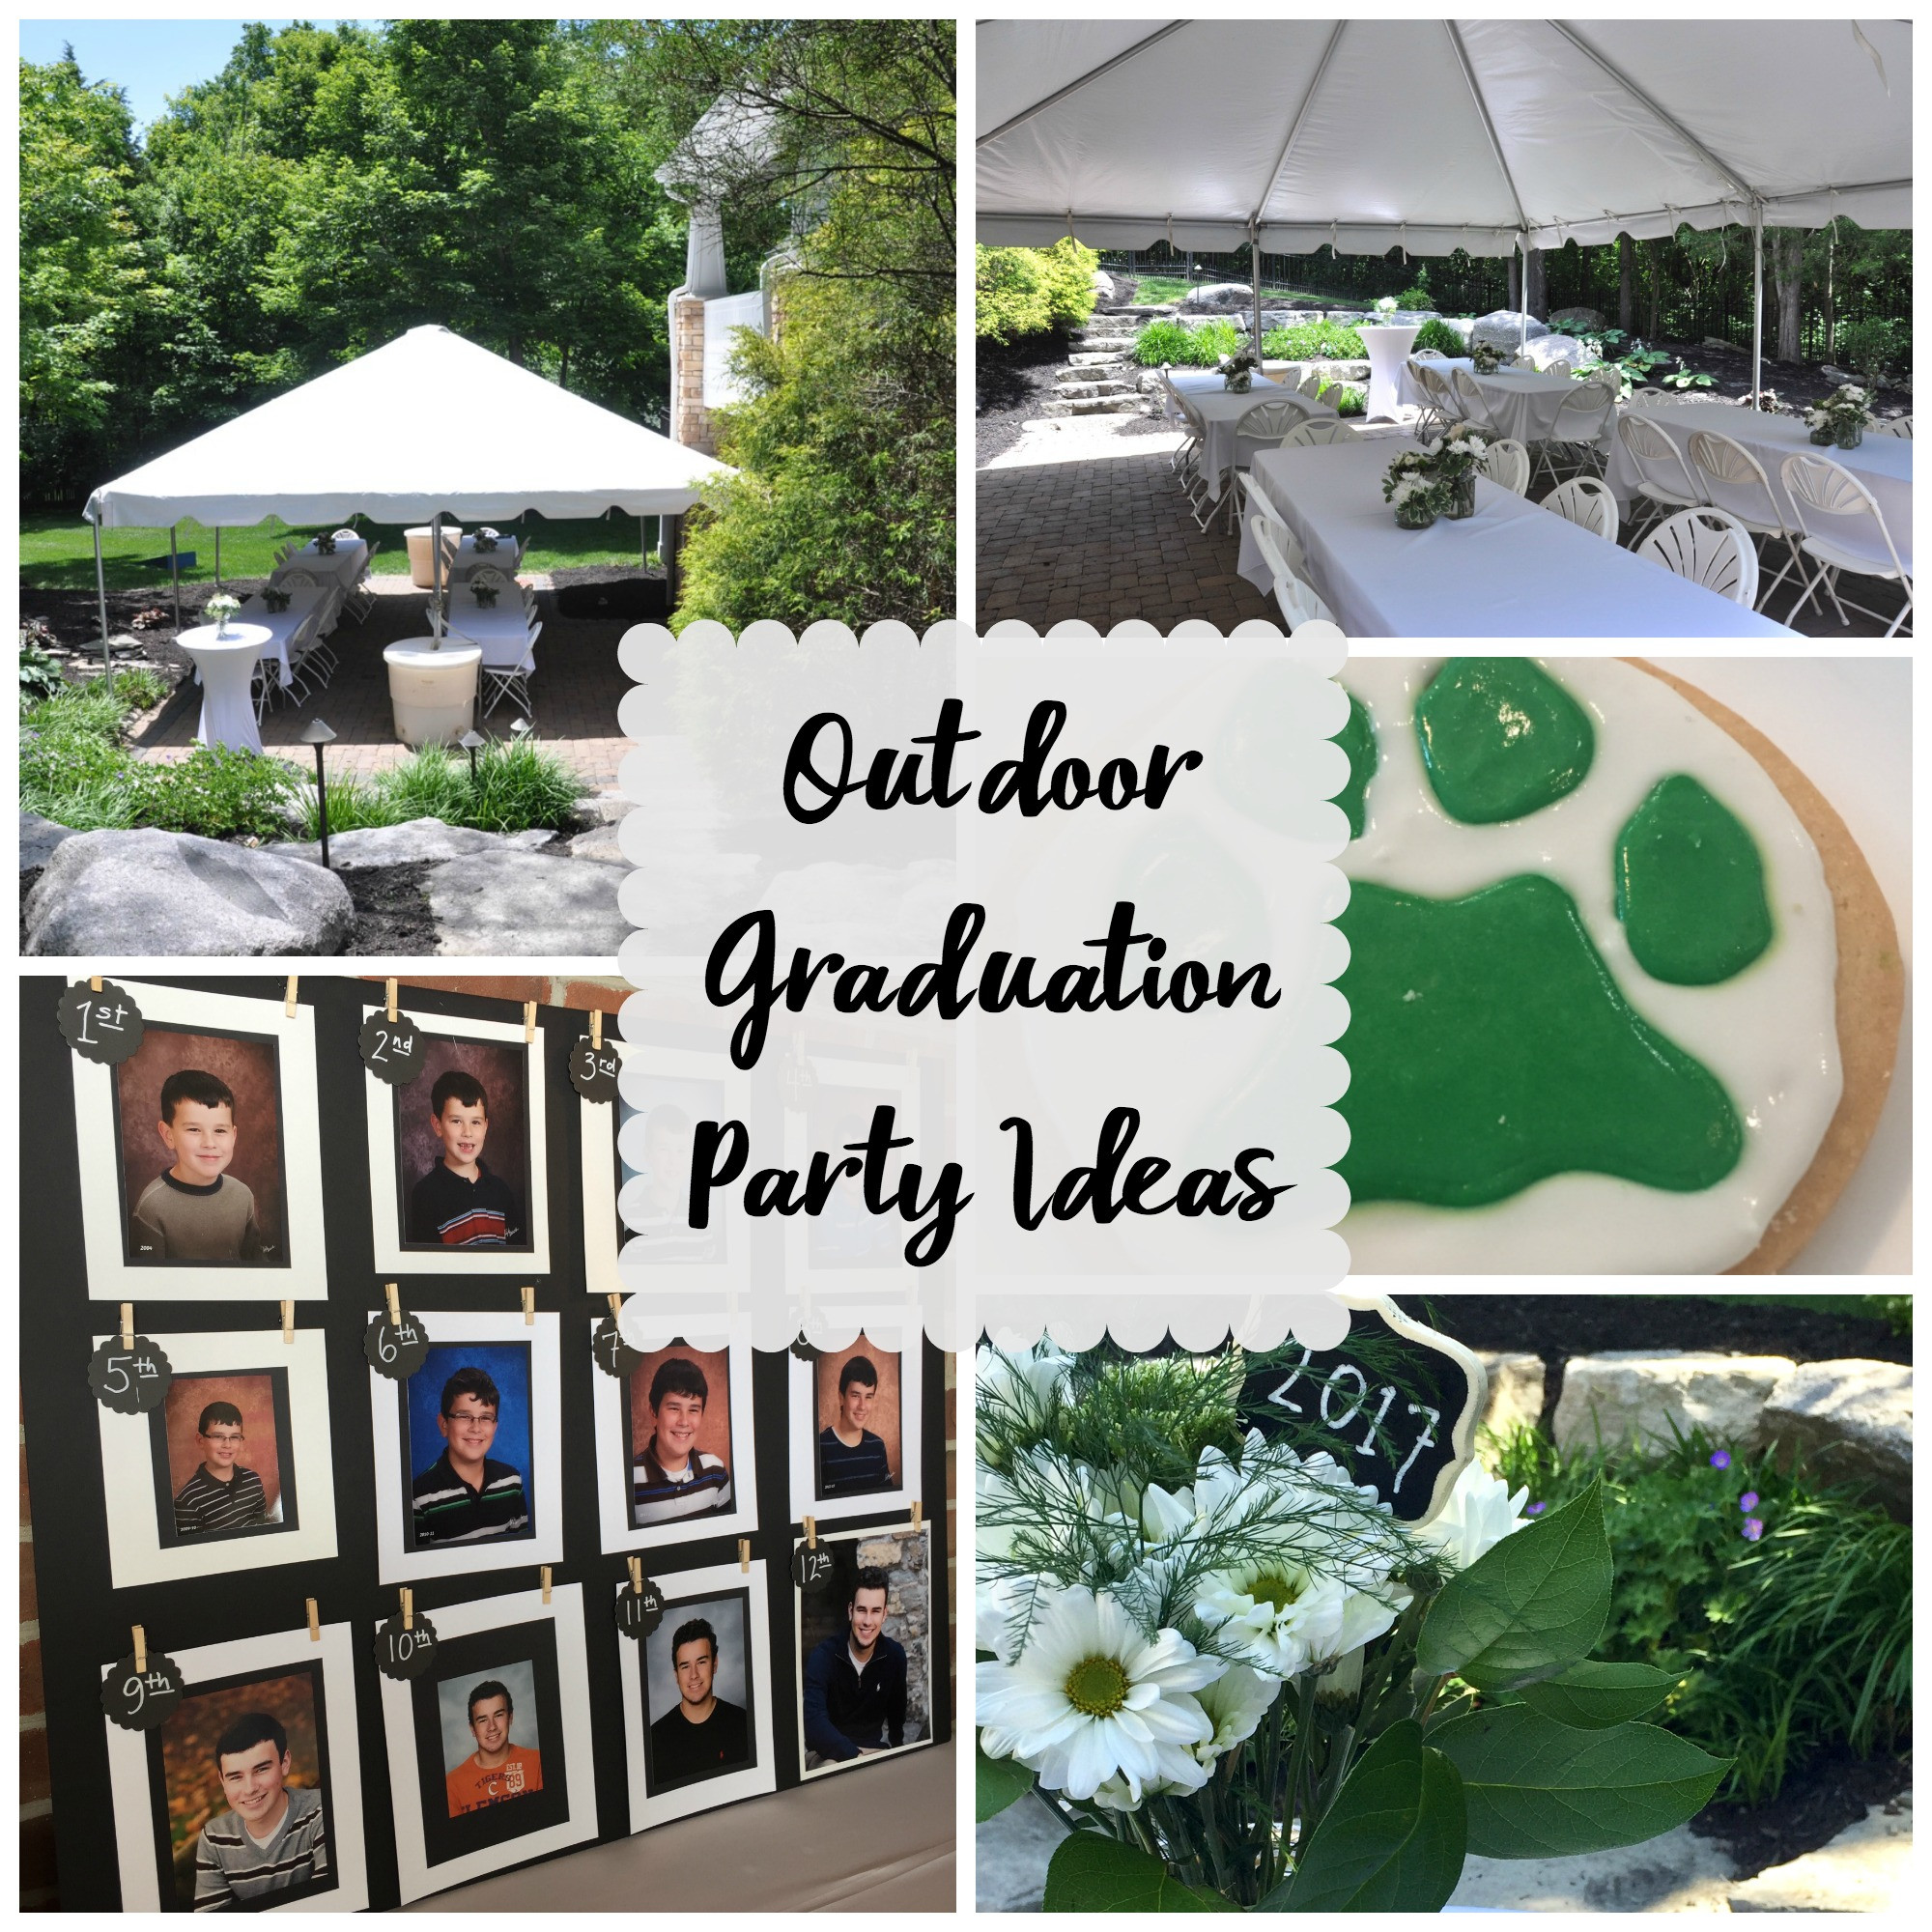 Ideas For A College Graduation Party
 Outdoor Graduation Party Evolution of Style